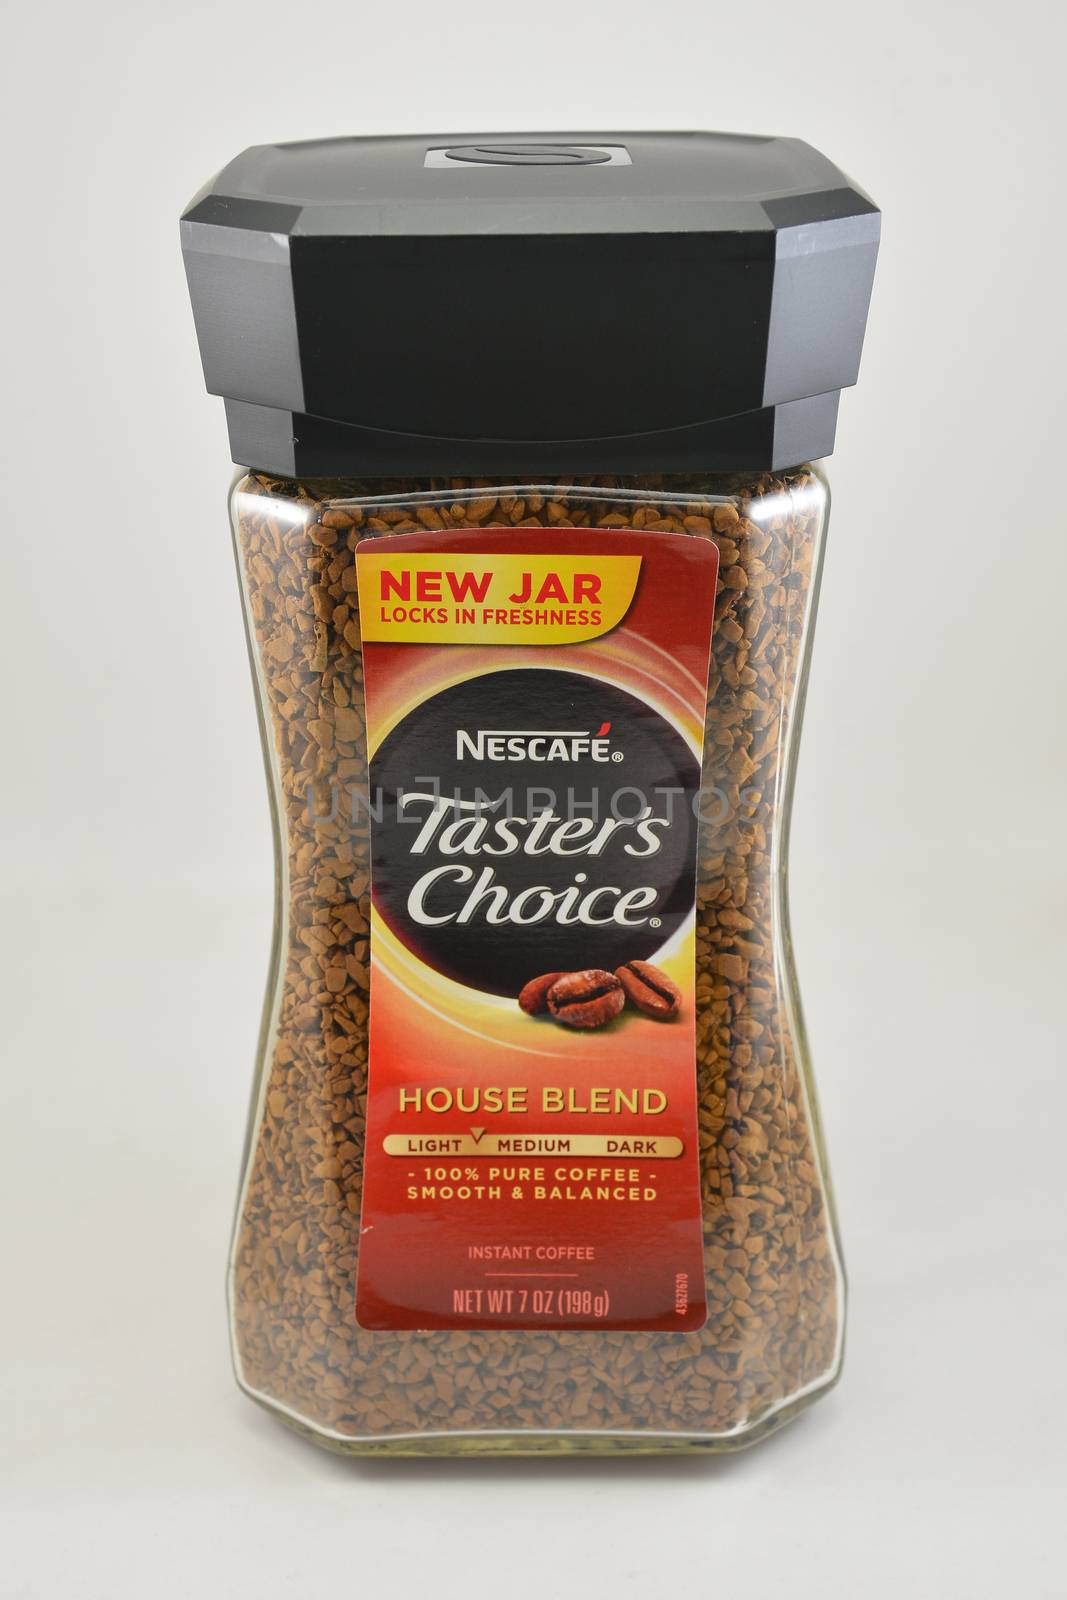 MANILA, PH - SEPT 10 - Nescafe tasters choice house blend instant coffee on September 10, 2020 in Manila, Philippines.